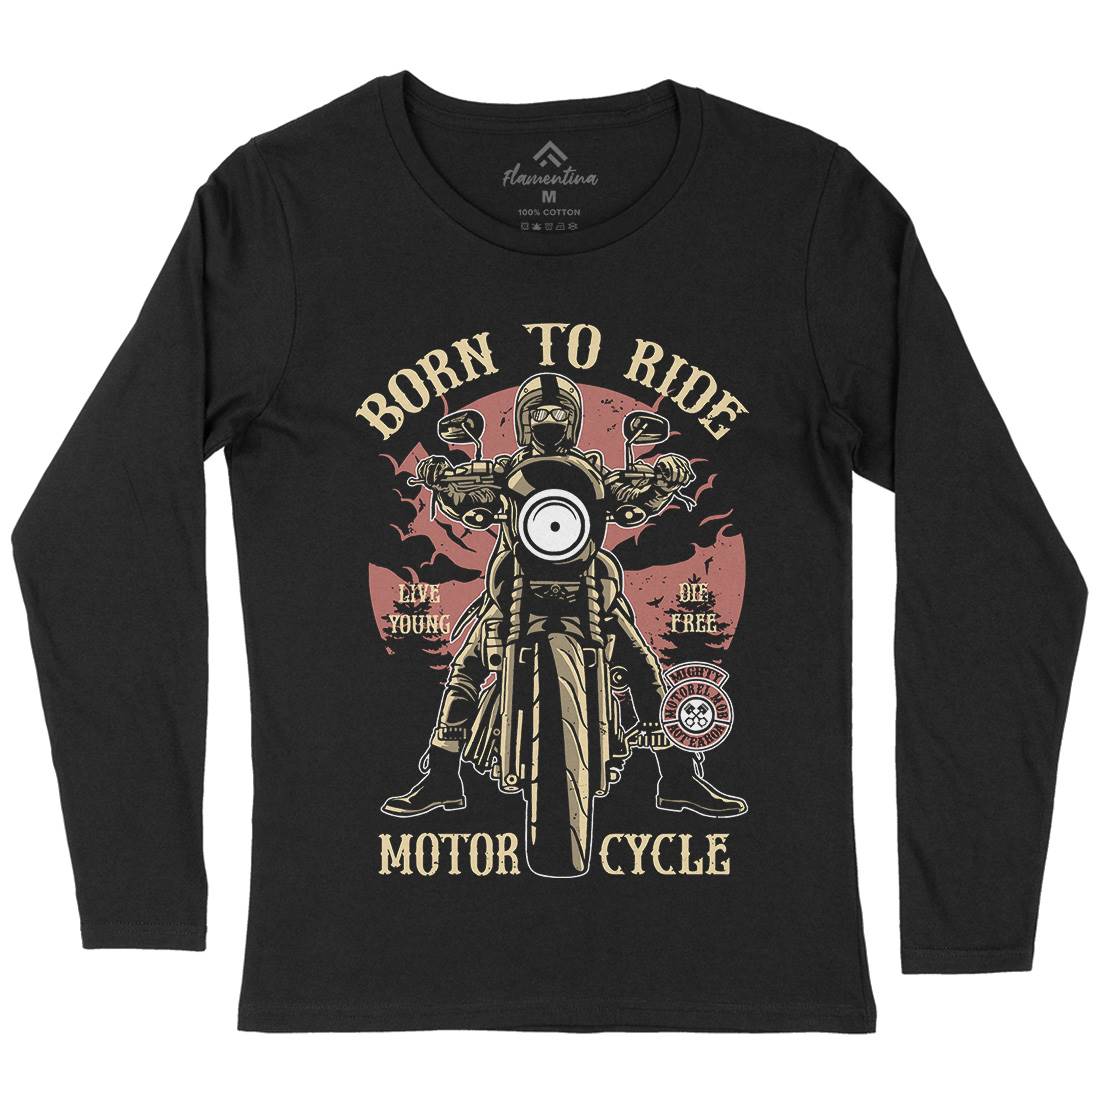 Born To Ride Womens Long Sleeve T-Shirt Motorcycles A512